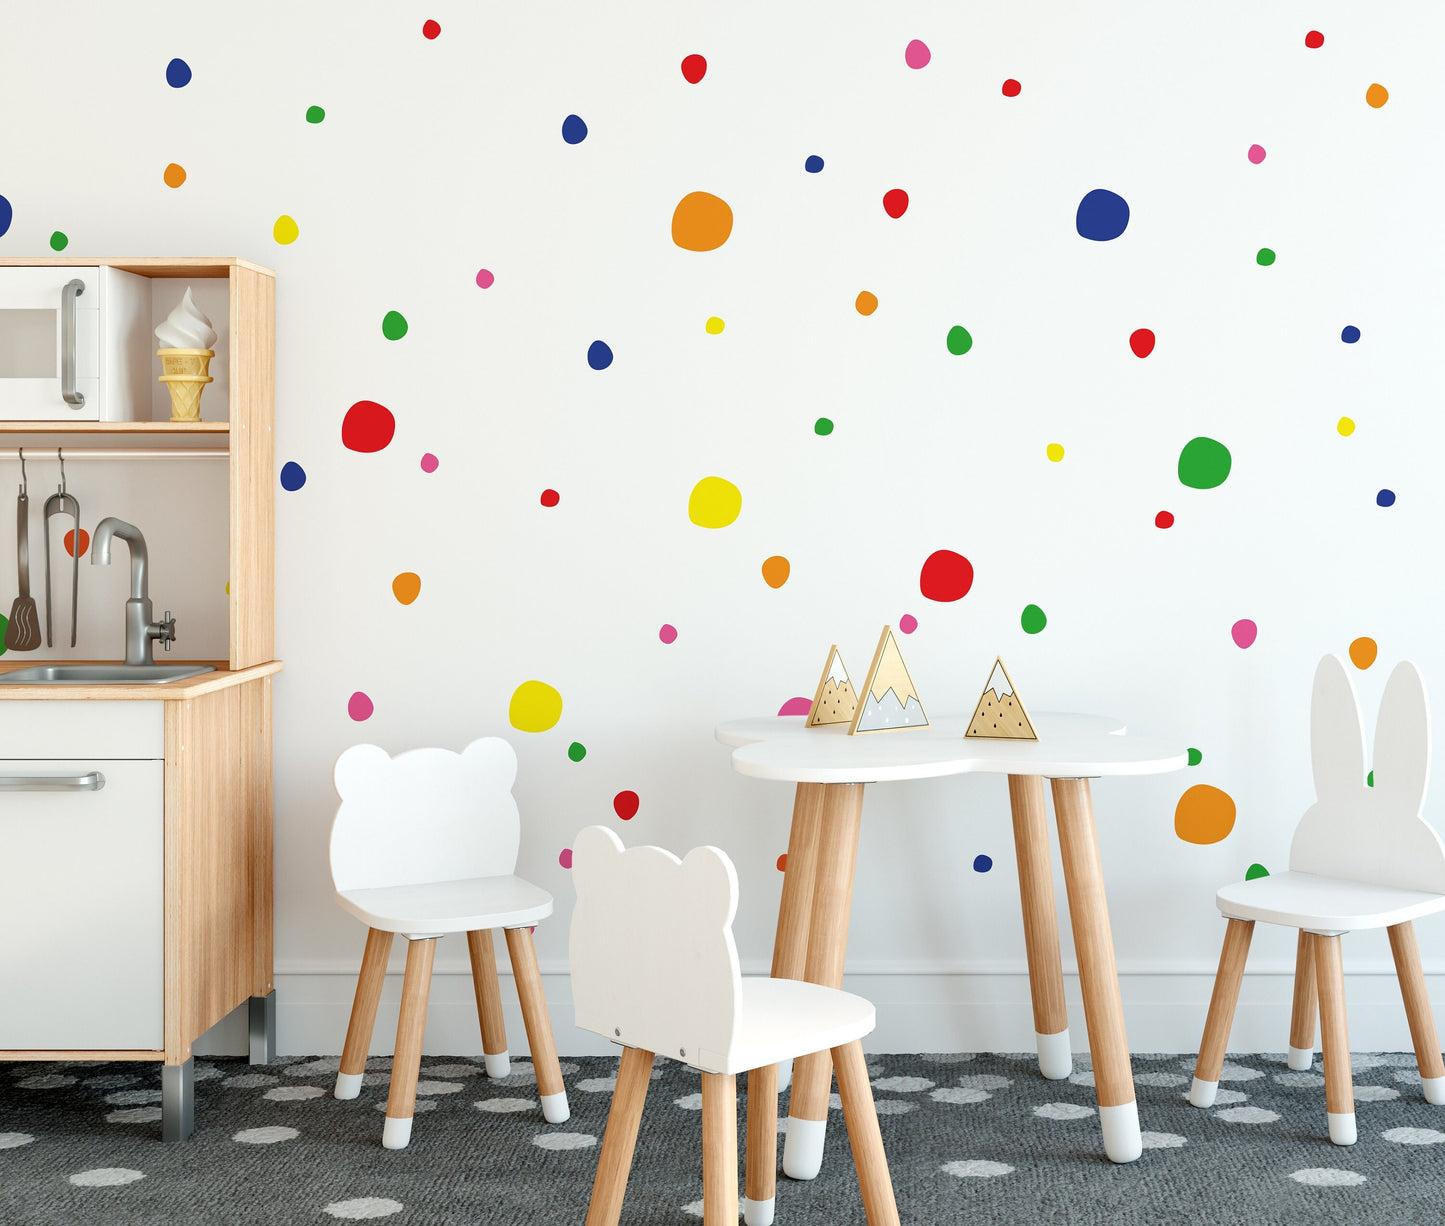 Multi Colour Polka Dot Blob Wall Stickers Dots Decals For Kids Room Nursery Children's Decor Removable 150 Pack